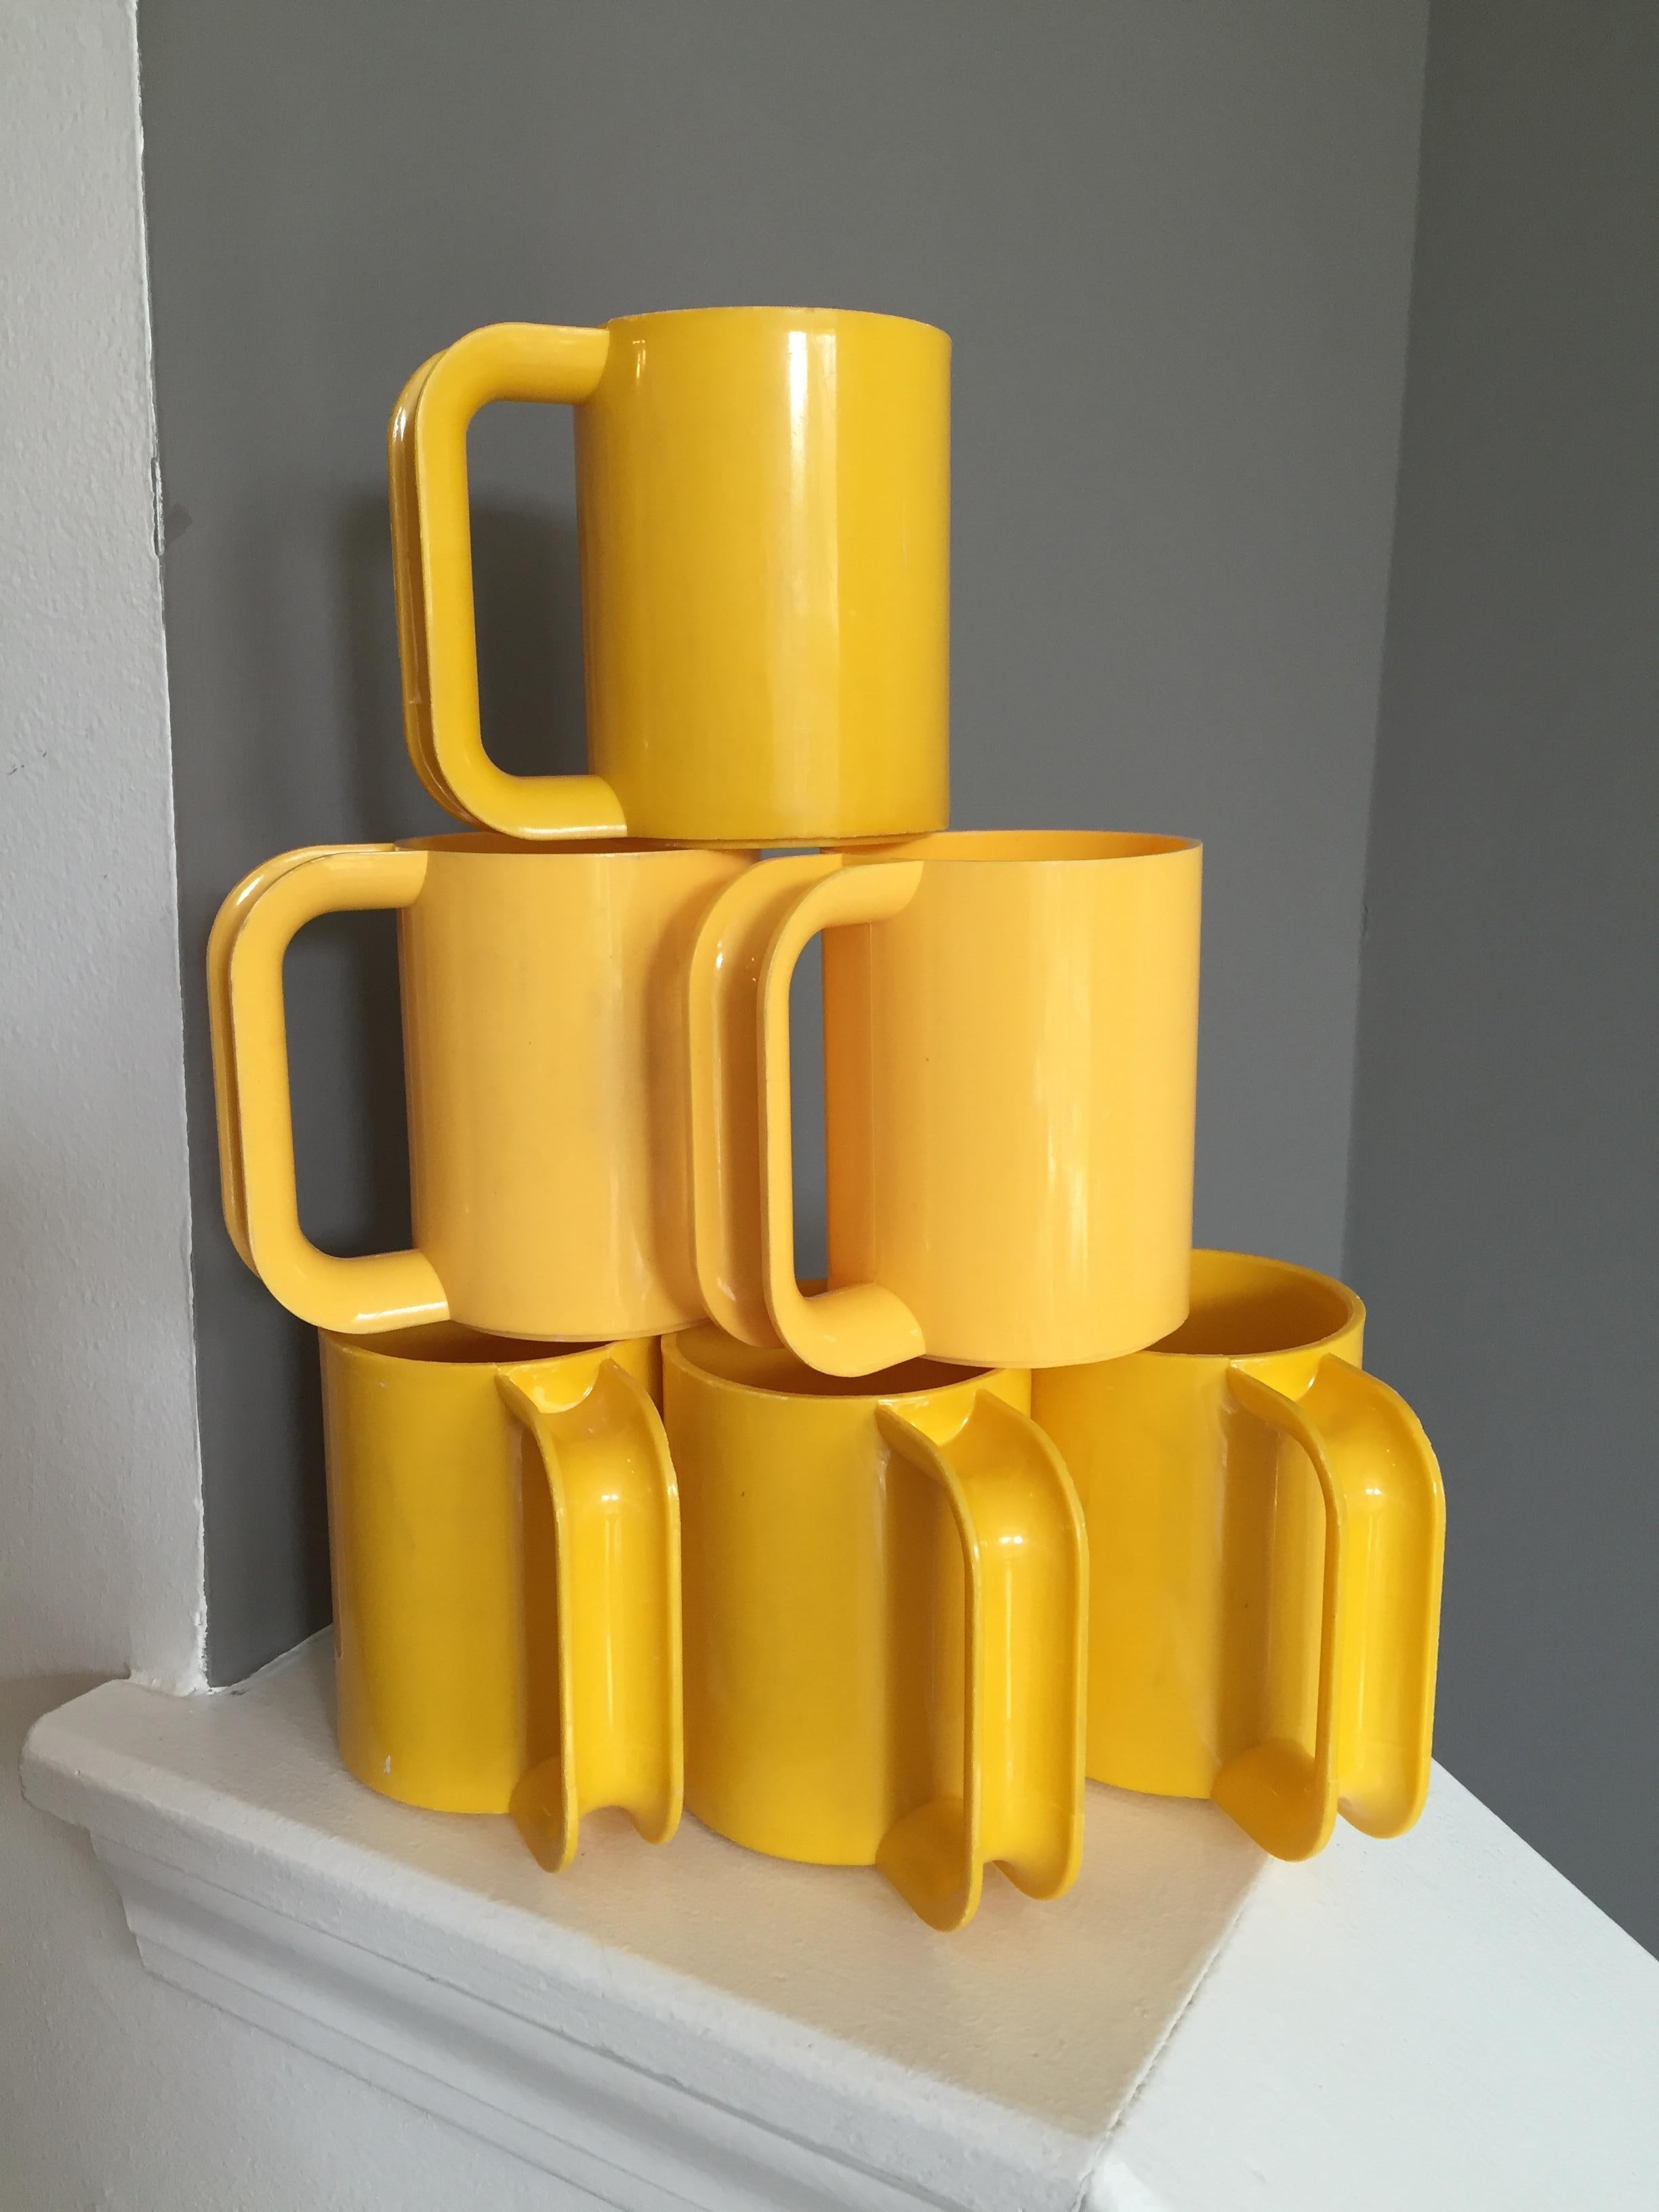 Mid-Century Modern Vintage Heller Ware Massimo Vignelli mugs - 6
School bus yellow, these iconic Massimo Vignelli melamine mugs will add a bright accent to any kitchen.

Set of 6, these vintage mugs are a wonderful find! 

Dimensions: 4.5